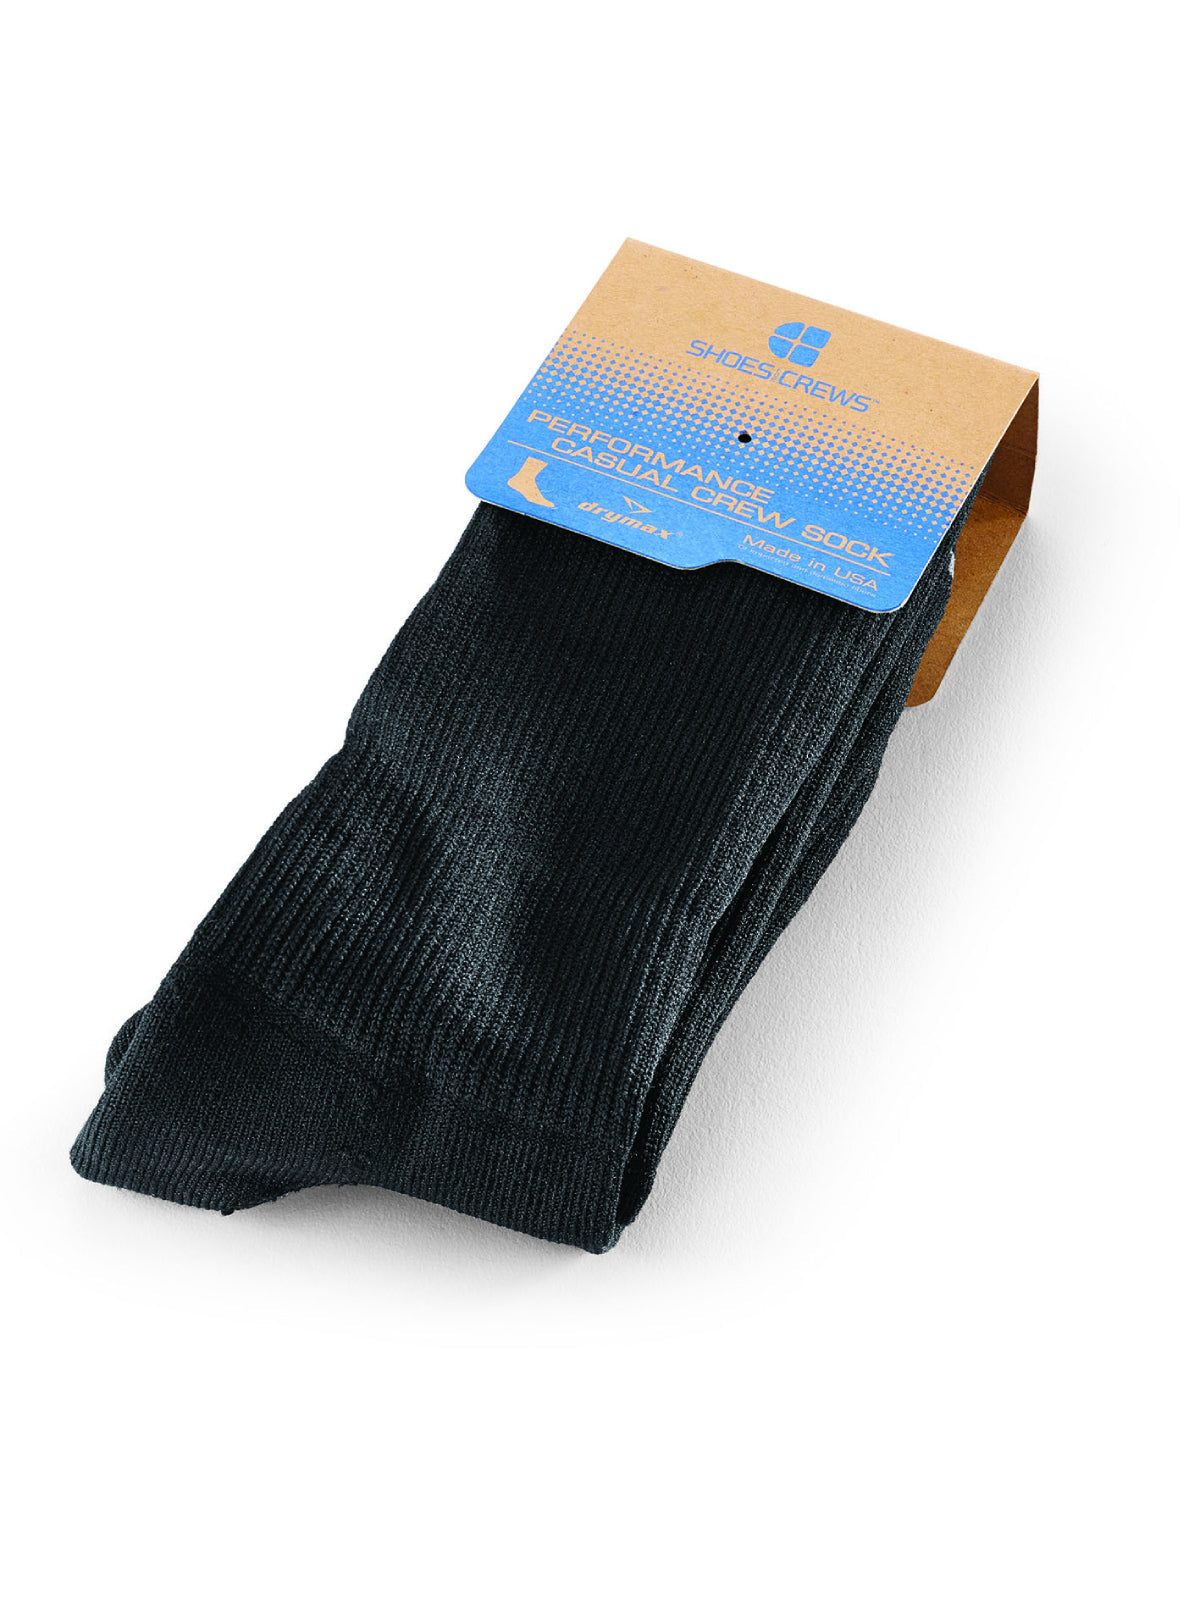 Unisex Crew Socks Black by Shoes For Crews -  ChefsCotton